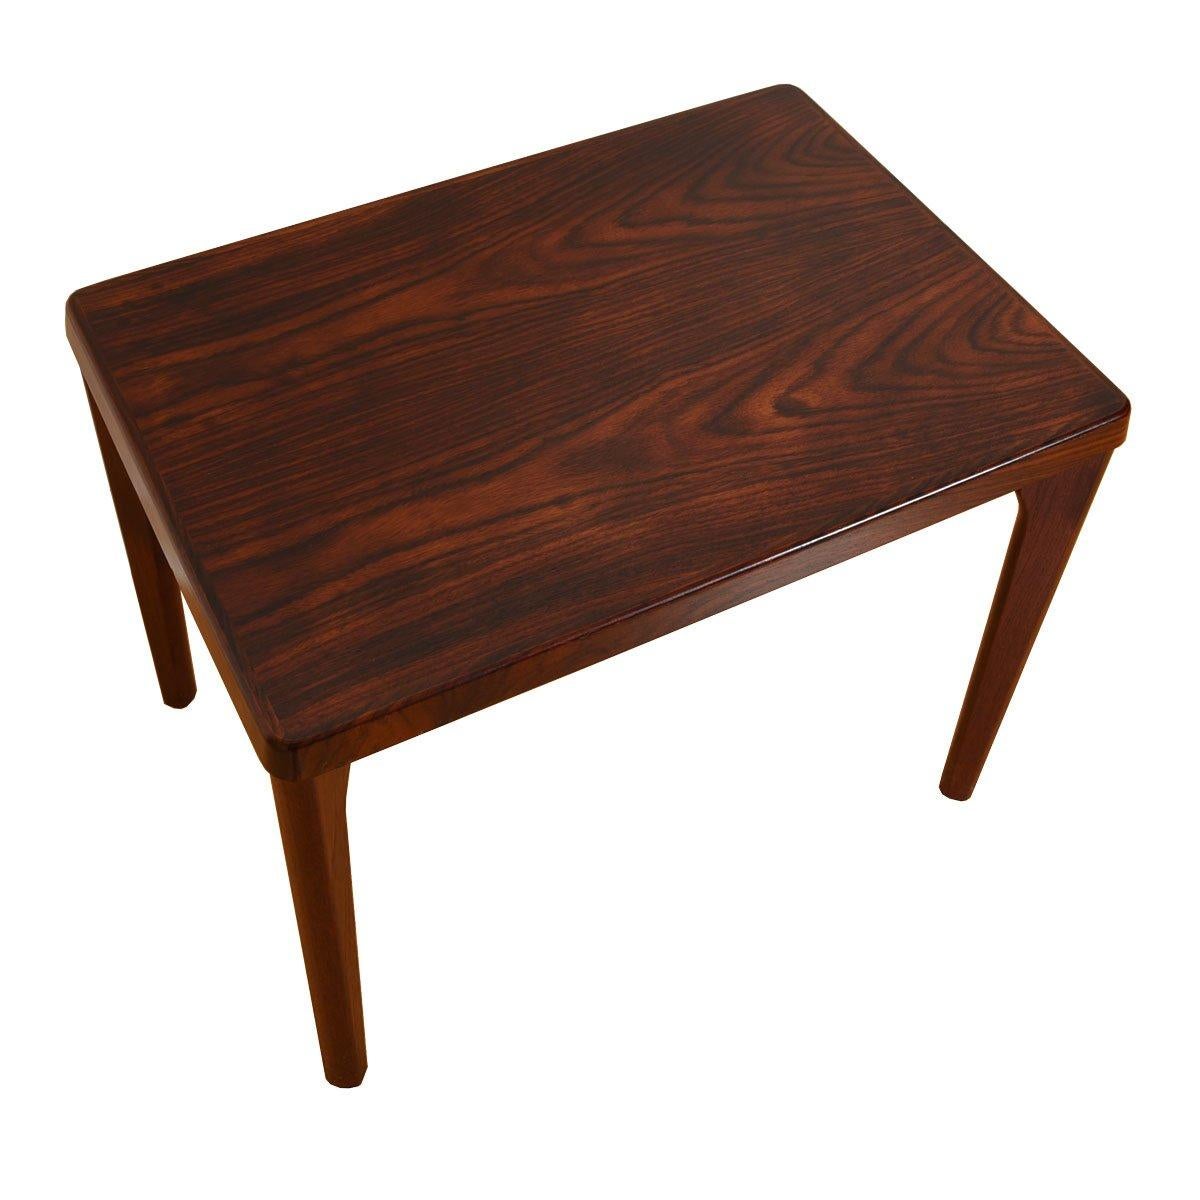 Table is rosewood with angled legs that taper and narrow from the rounded-edge rectangular top. Has beautiful figuring that is highlighted on the table top and edge banding.



*Due to time, labor costs, and heightened restrictions on Brazilian